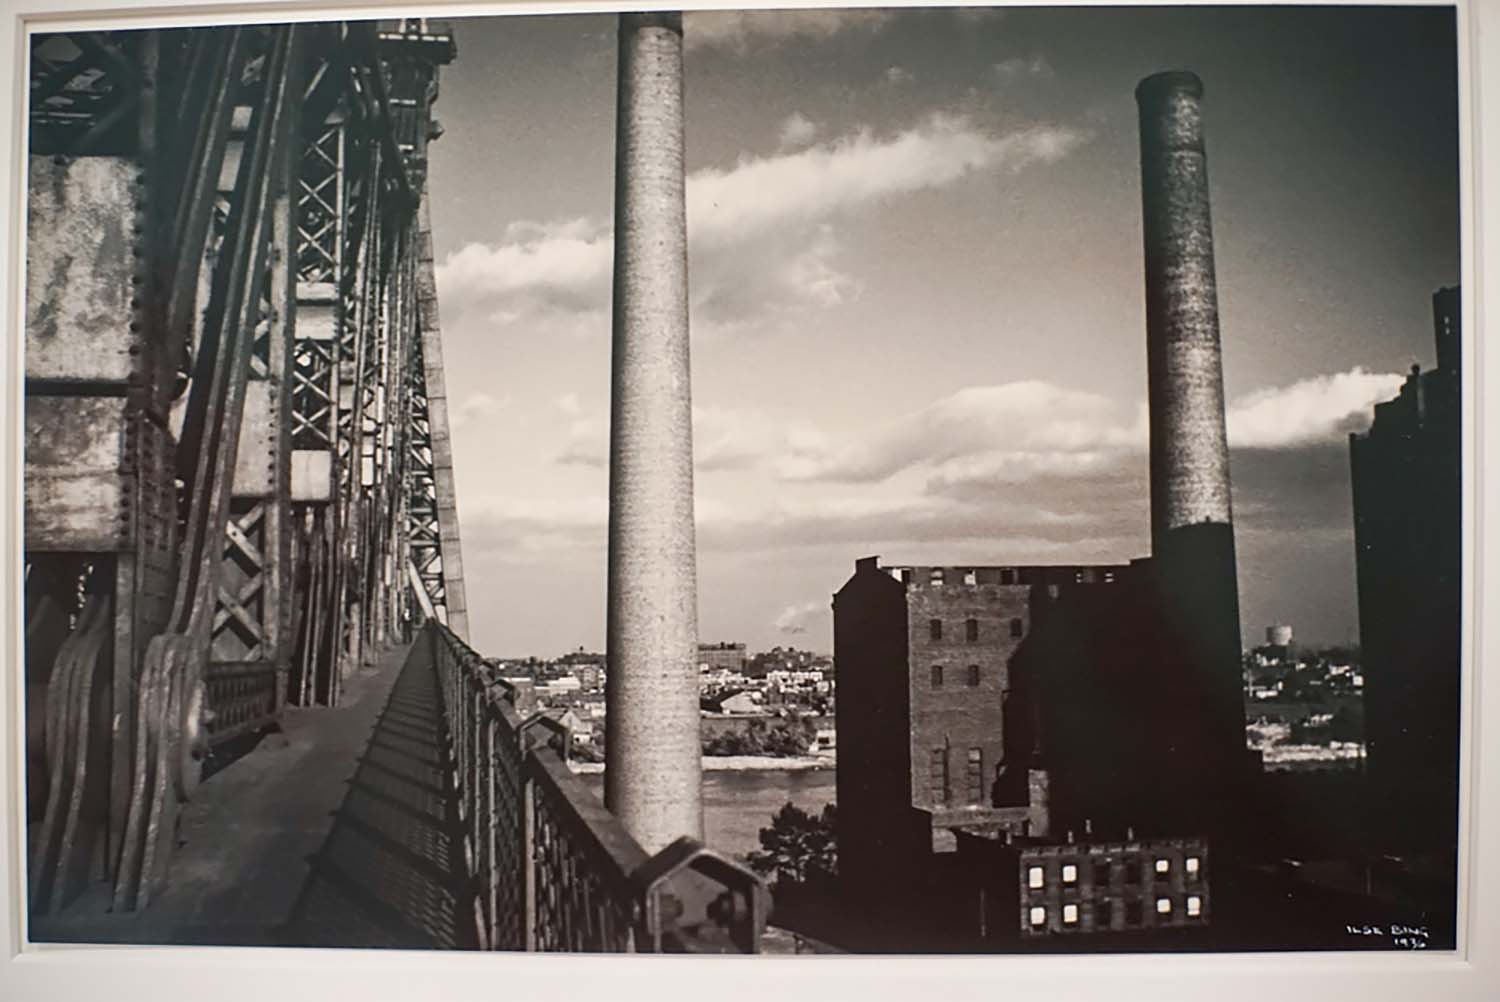 All Photography at the #NewWhitney Museum Ilse Bing America Is Hard to See Show @SteveGiovinco